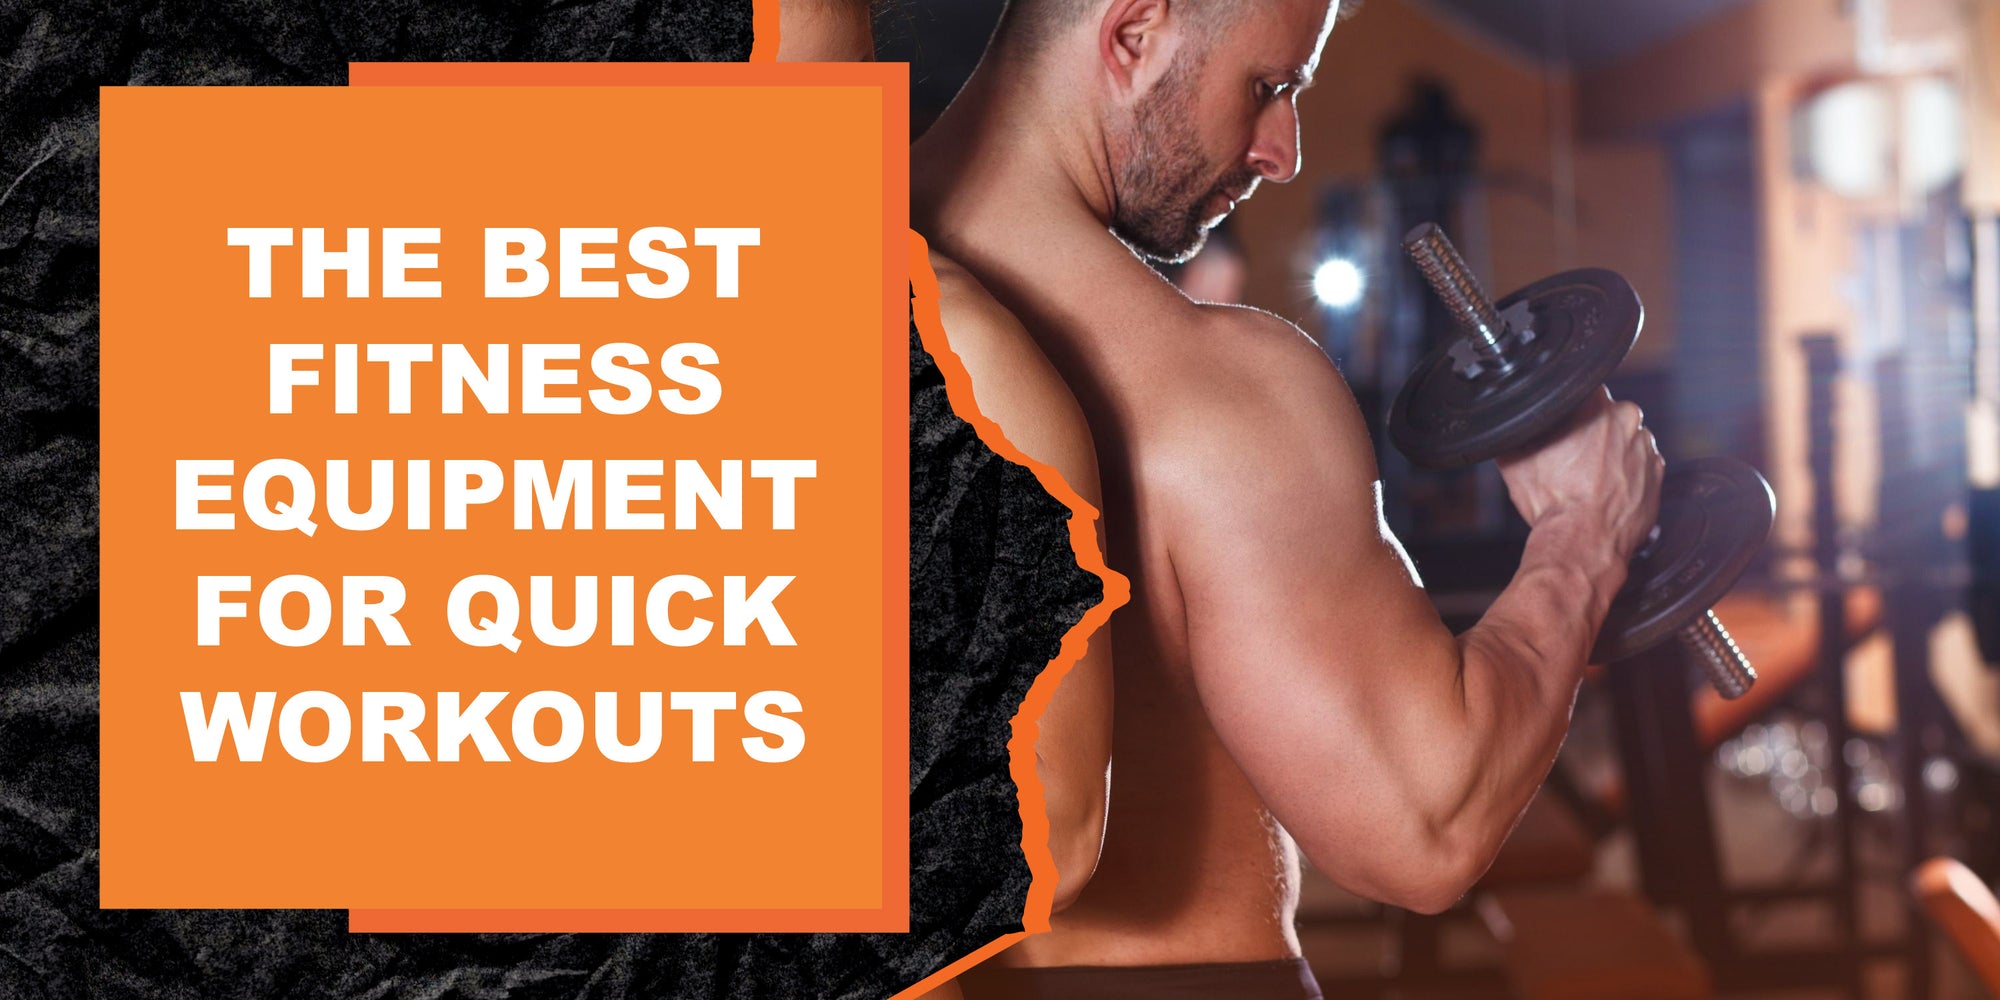 The Best Fitness Equipment for Quick Workouts